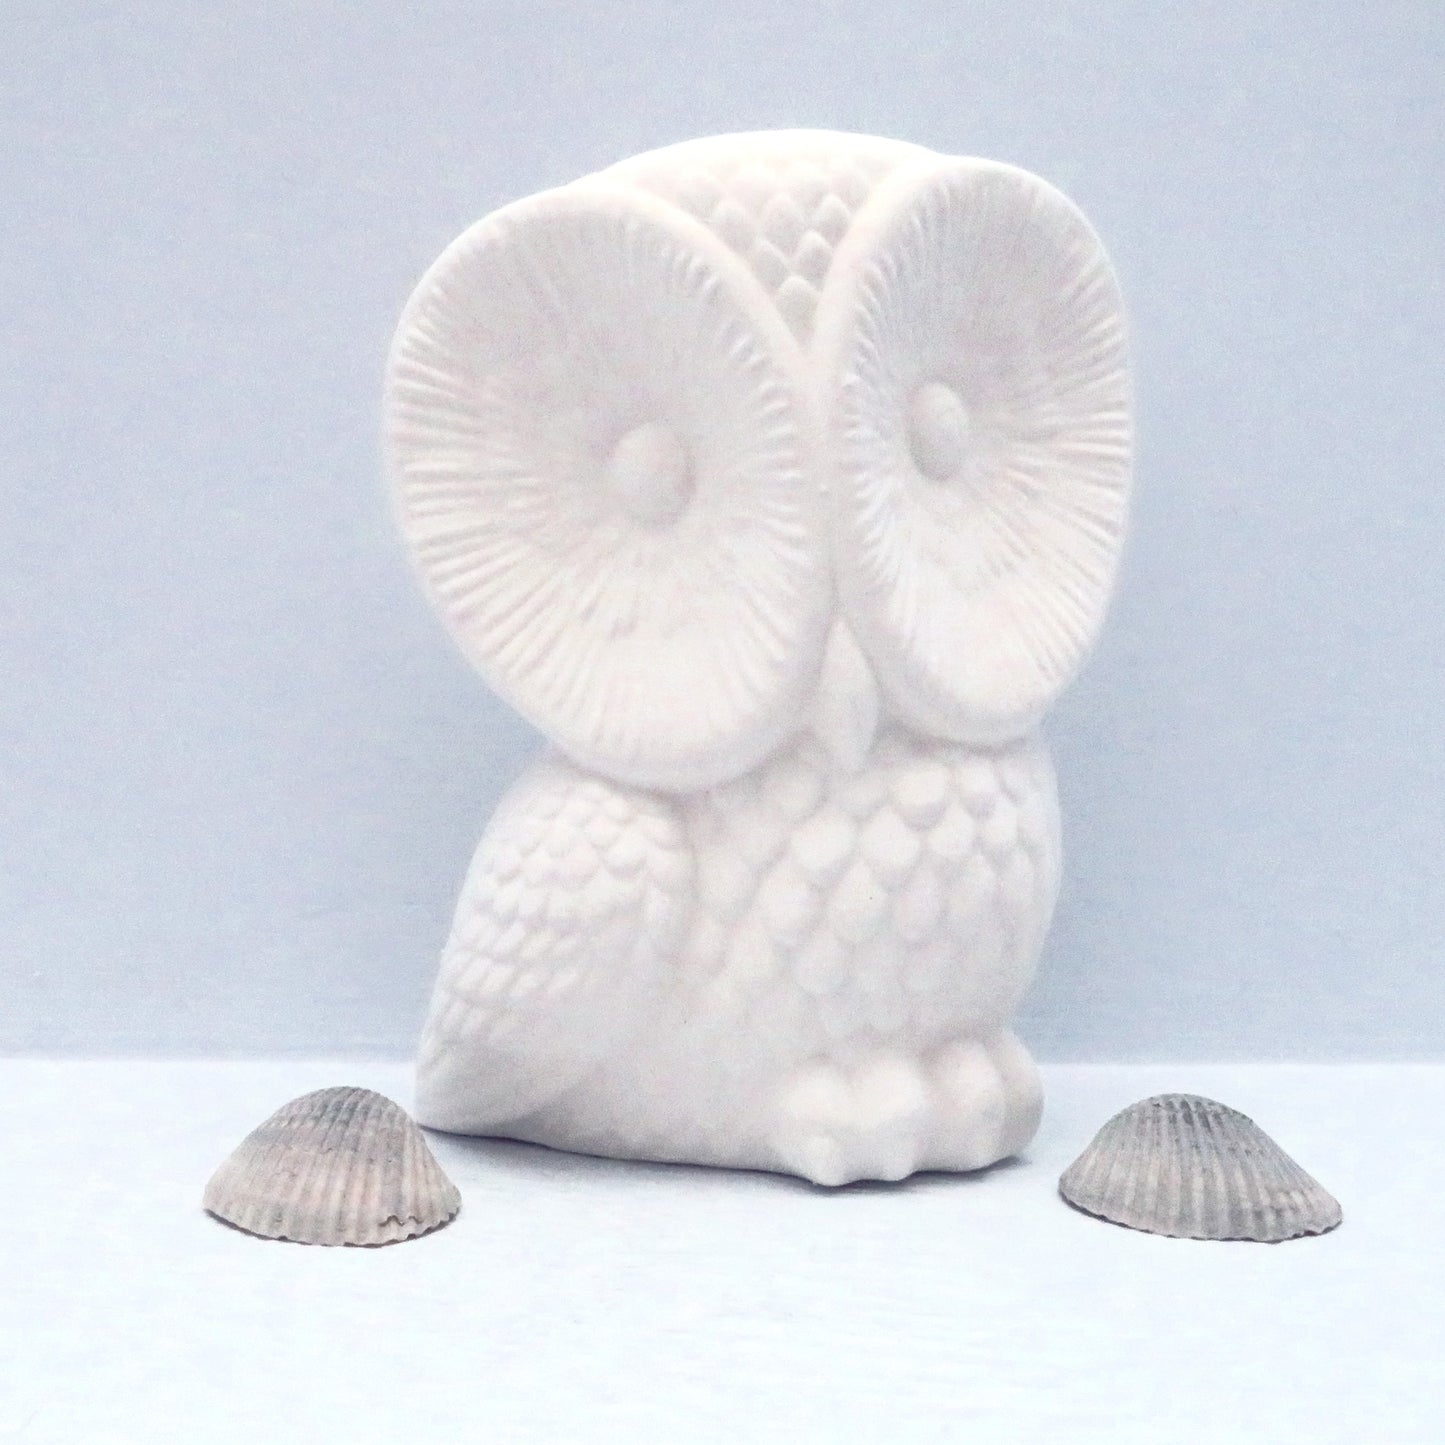 unpainted ceramic owl figurine on pale blue shelf with small sea shells next to it.